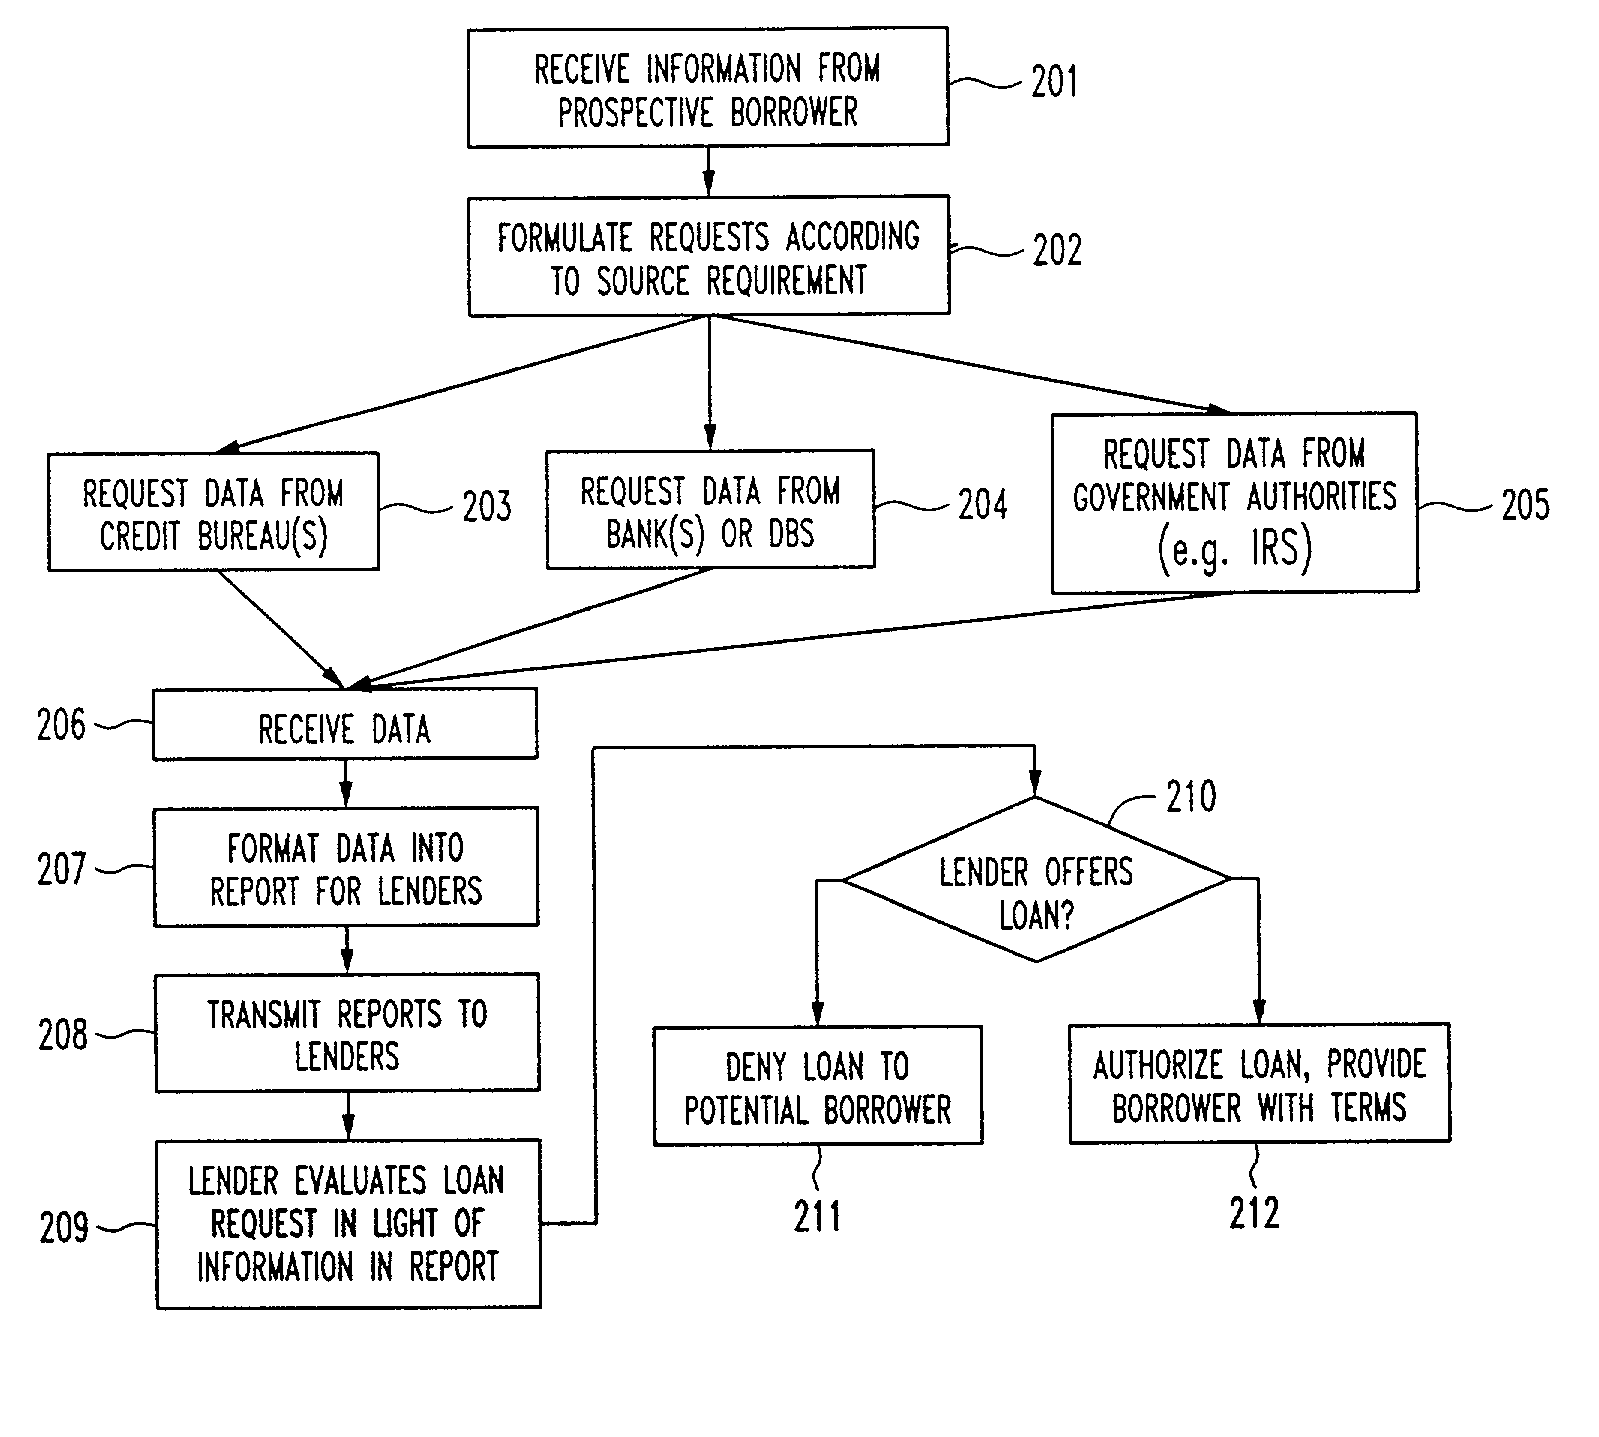 Systems and methods for electronically verifying and processing information